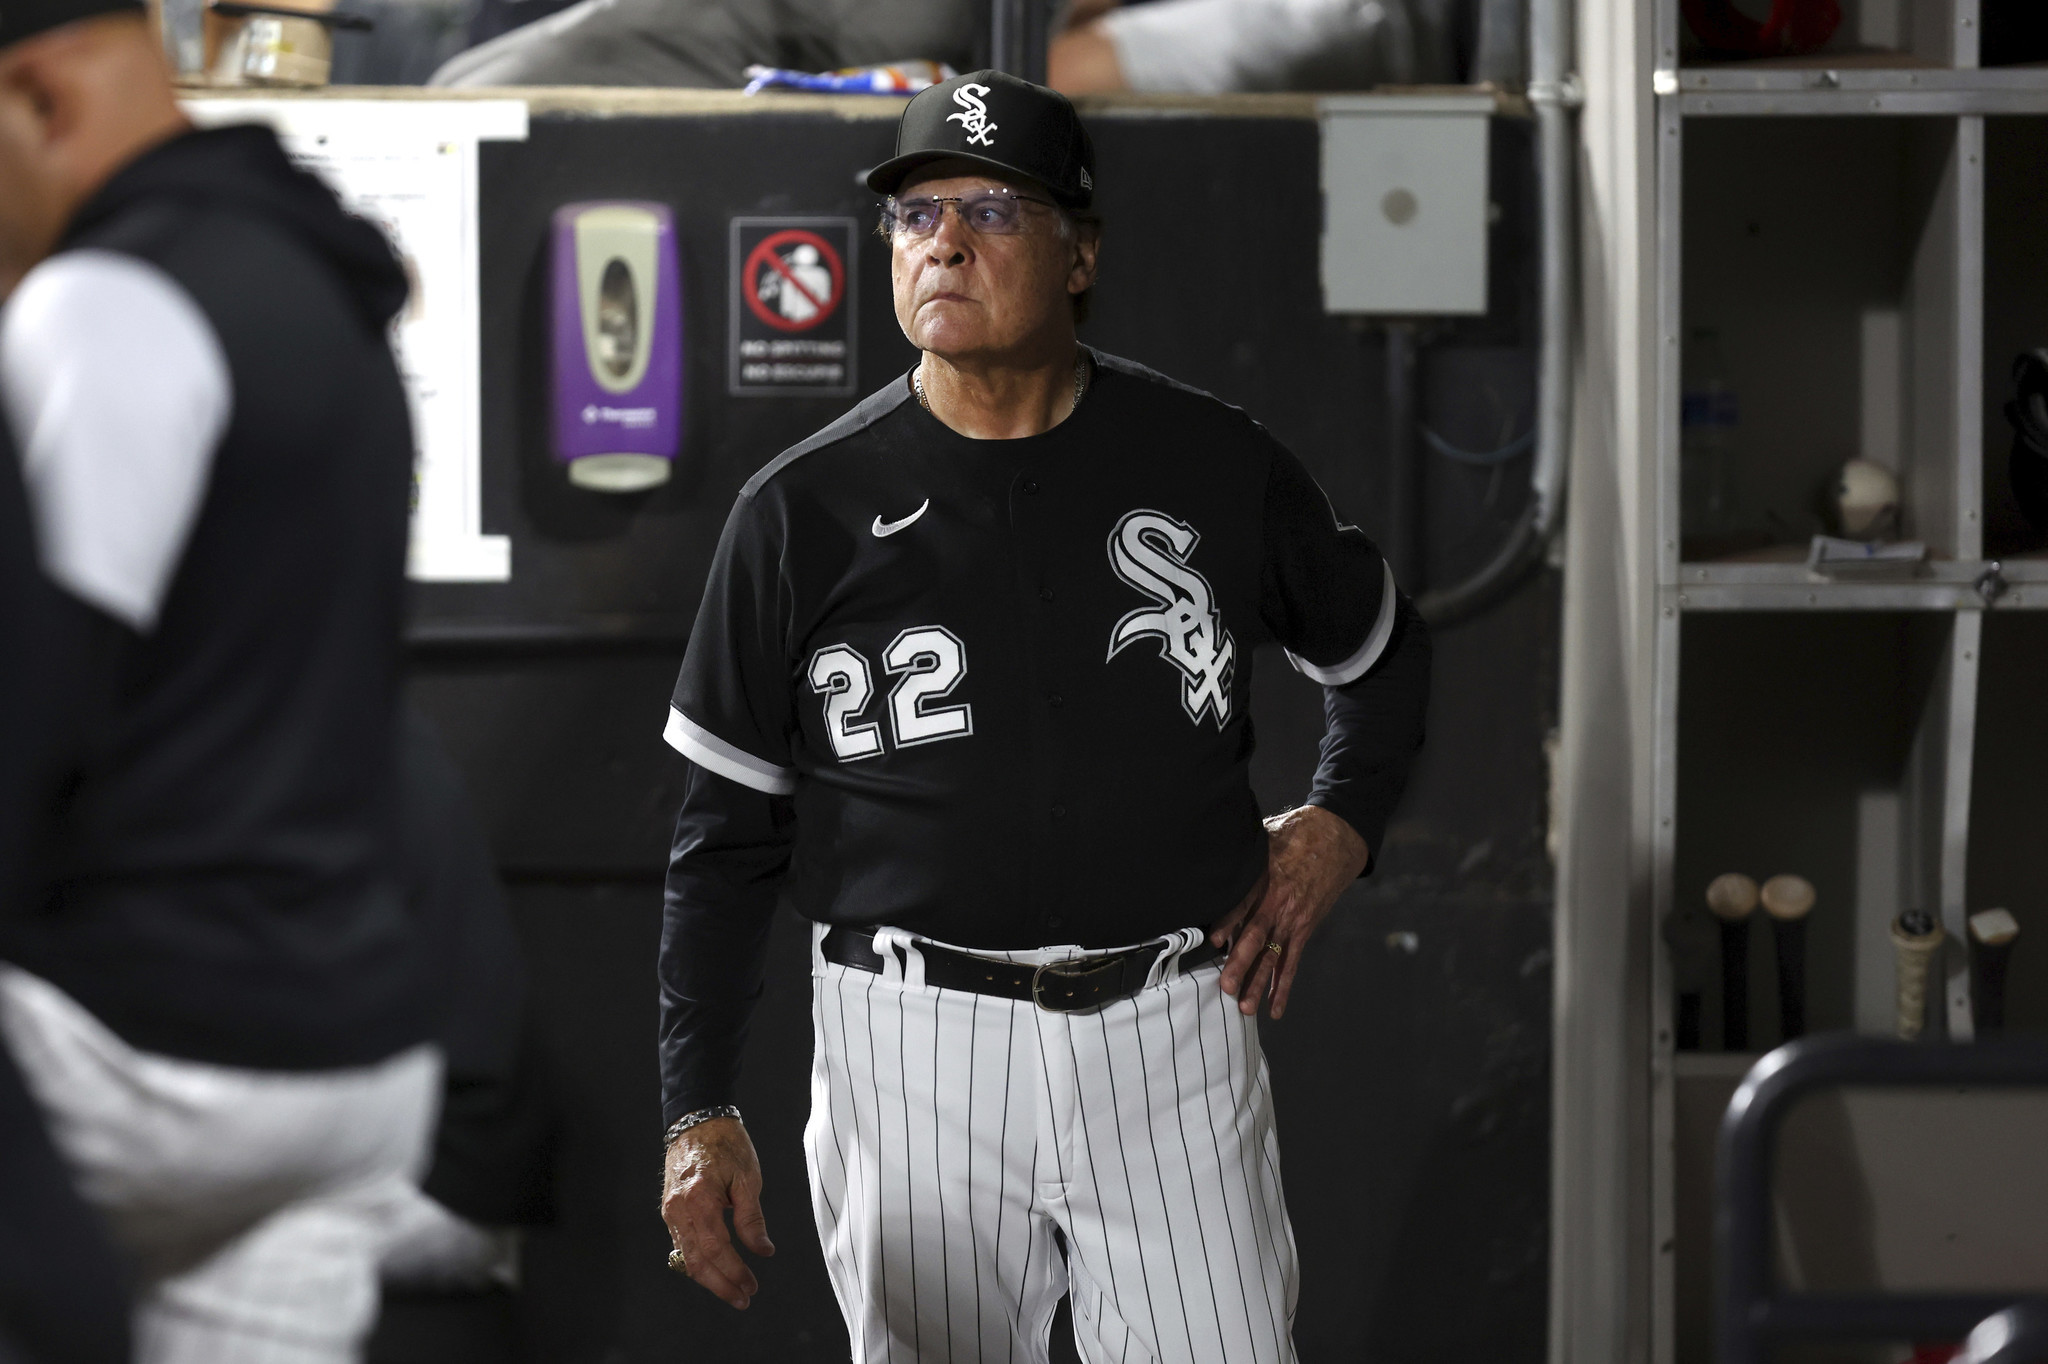 What If The White Sox And Bears Switched Places?